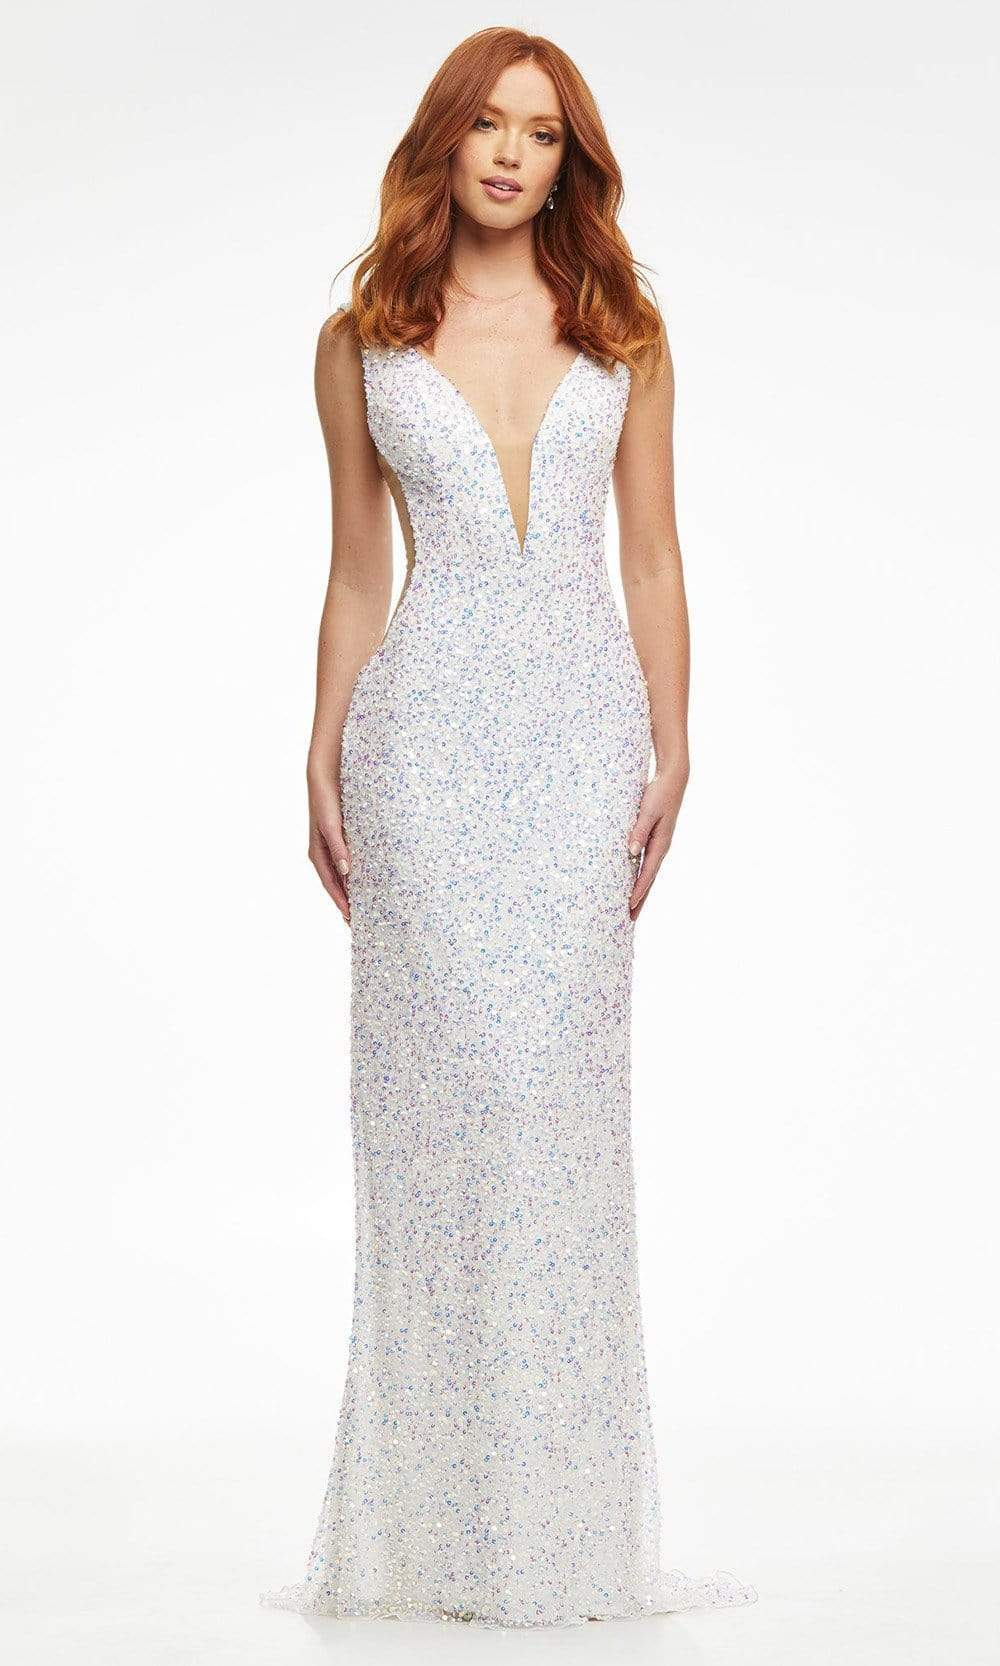 Ashley Lauren - 11081 Fitted Sequin Evening Dress Evening Dresses 00 / Ab/Ivory